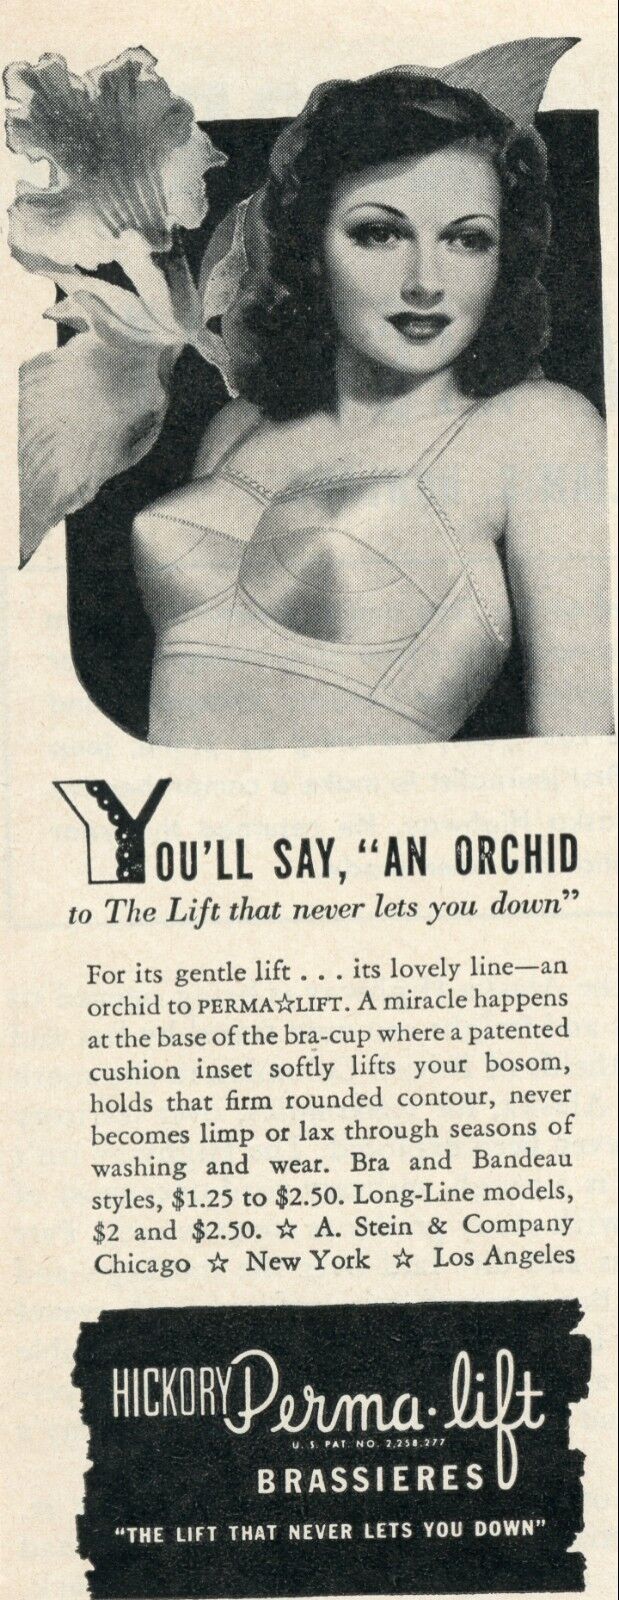 1943 LIFE MAG. PRINT AD FOR HICKORY PERMA LIFT BRASSIERES NEVER LETS YOUDOWN B5